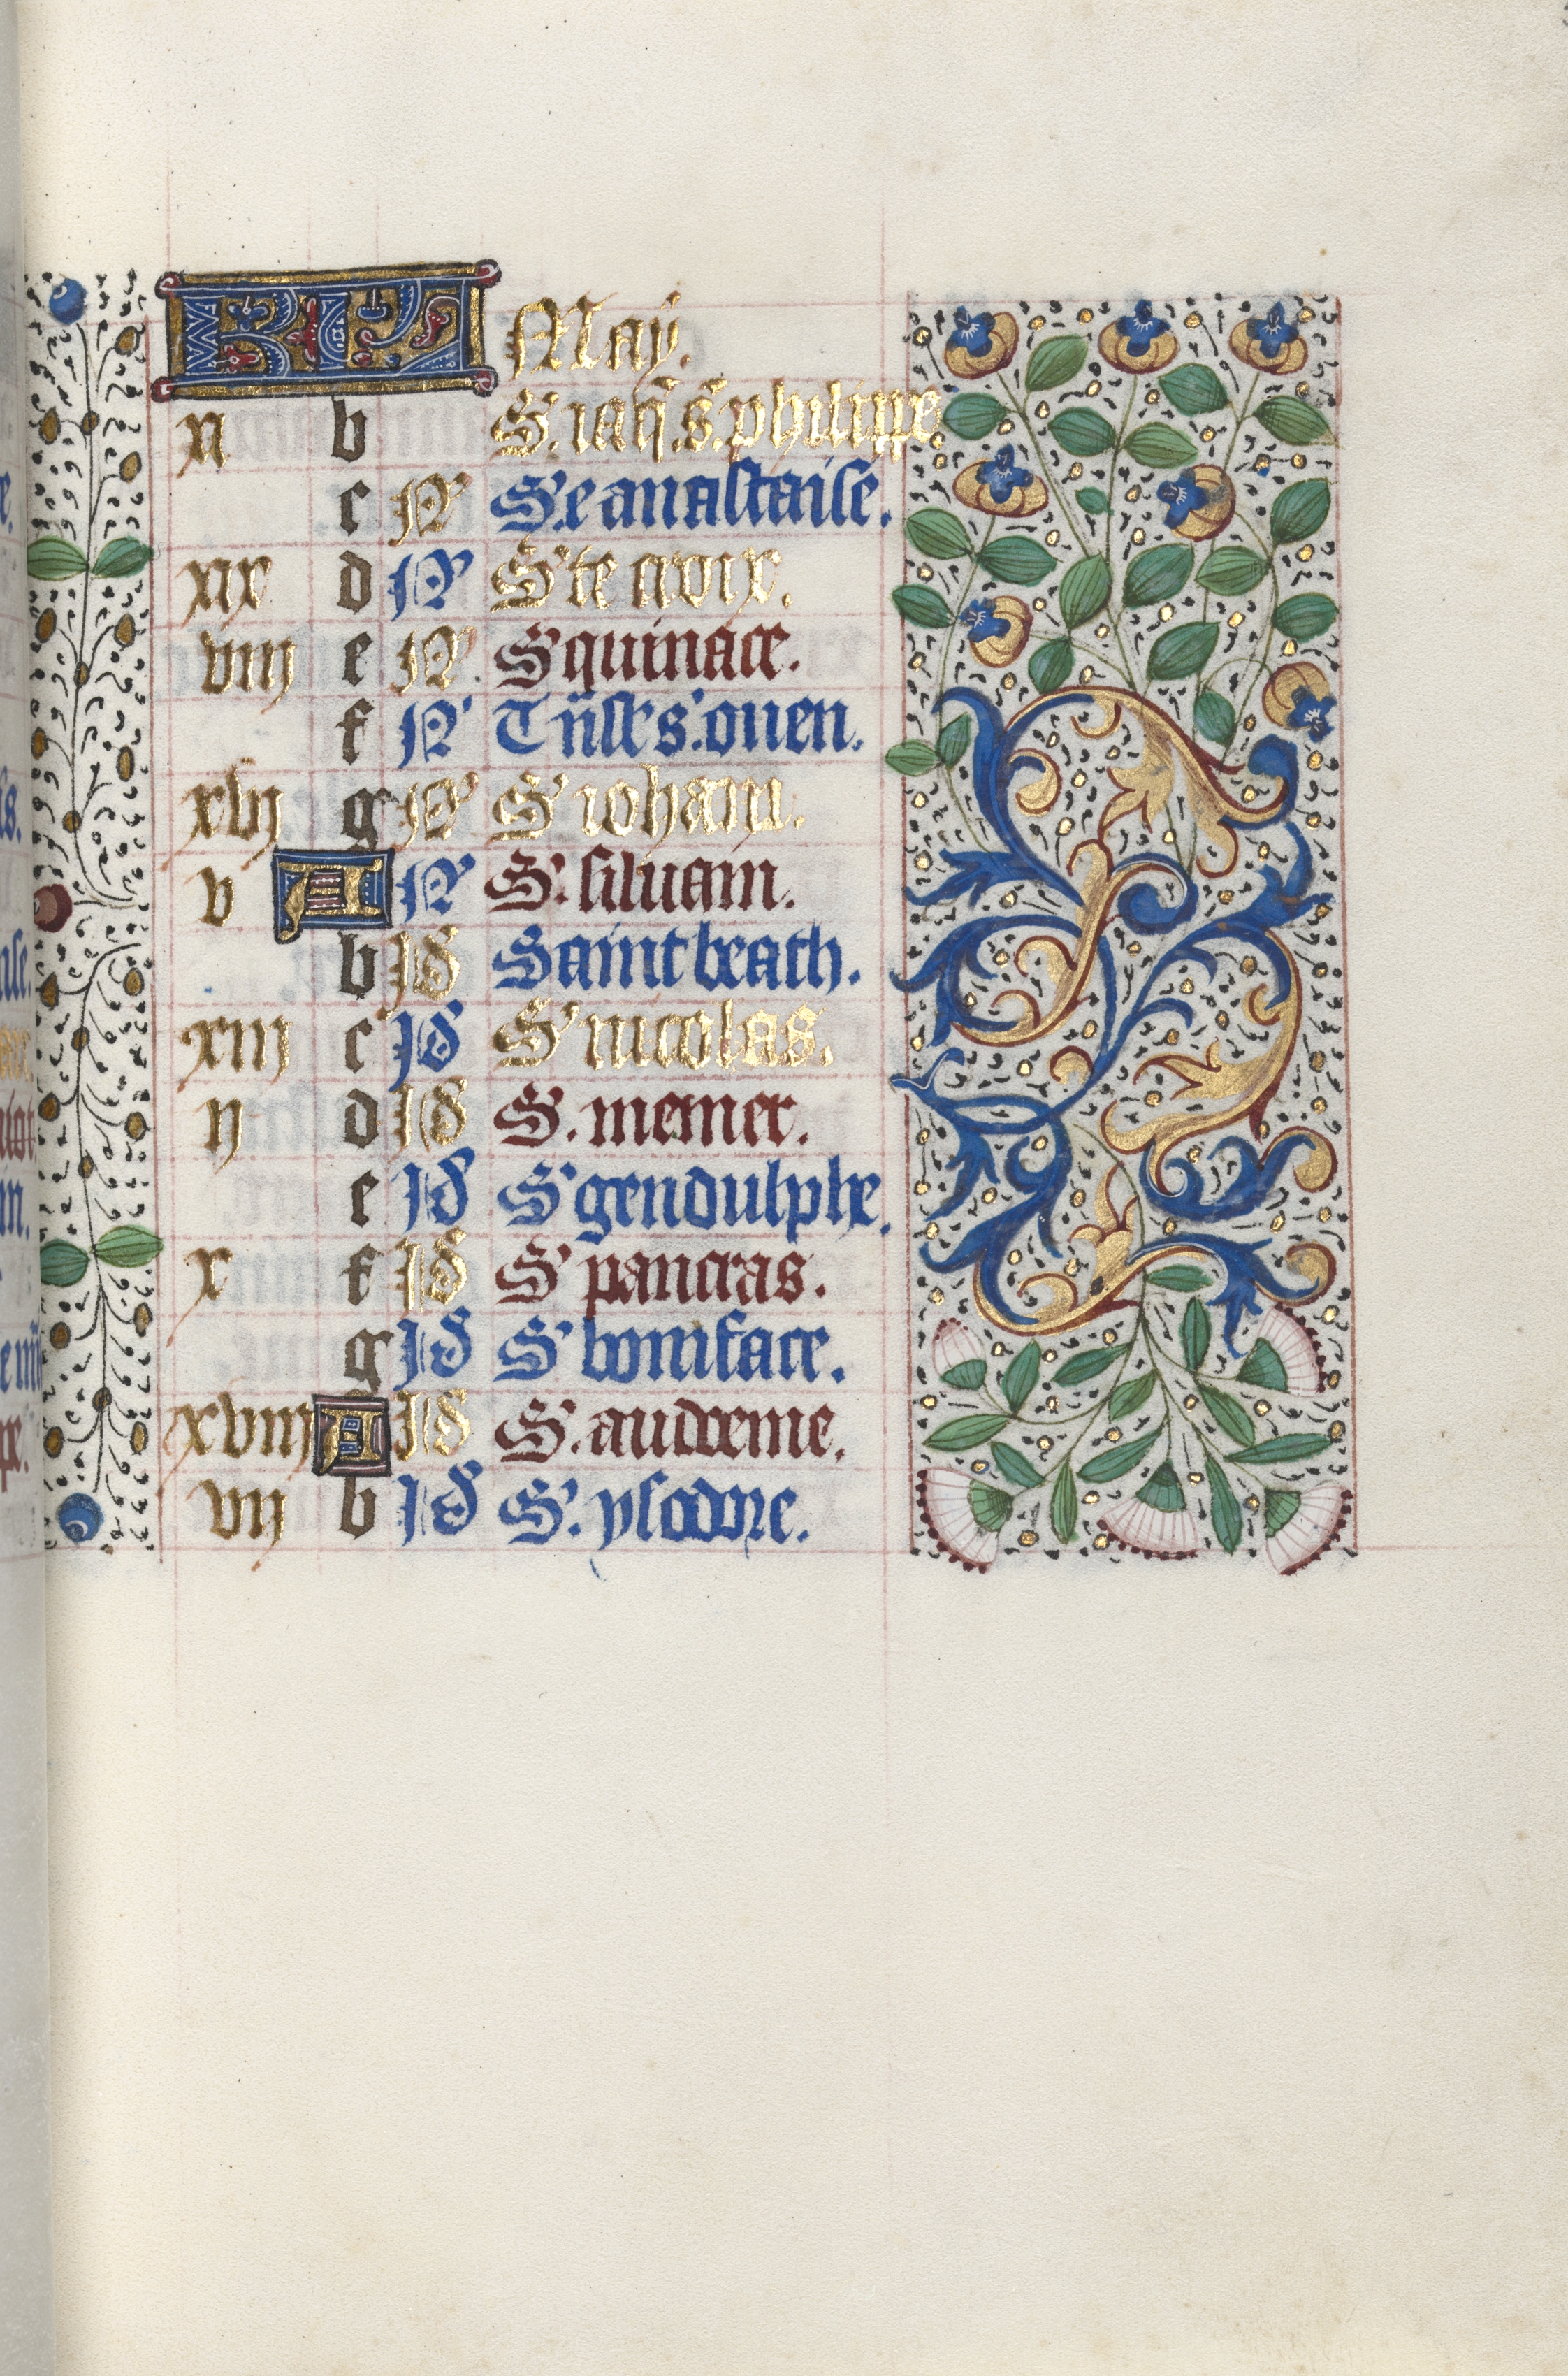 Book of Hours (Use of Rouen): fol. 5r, Calendar Page for May